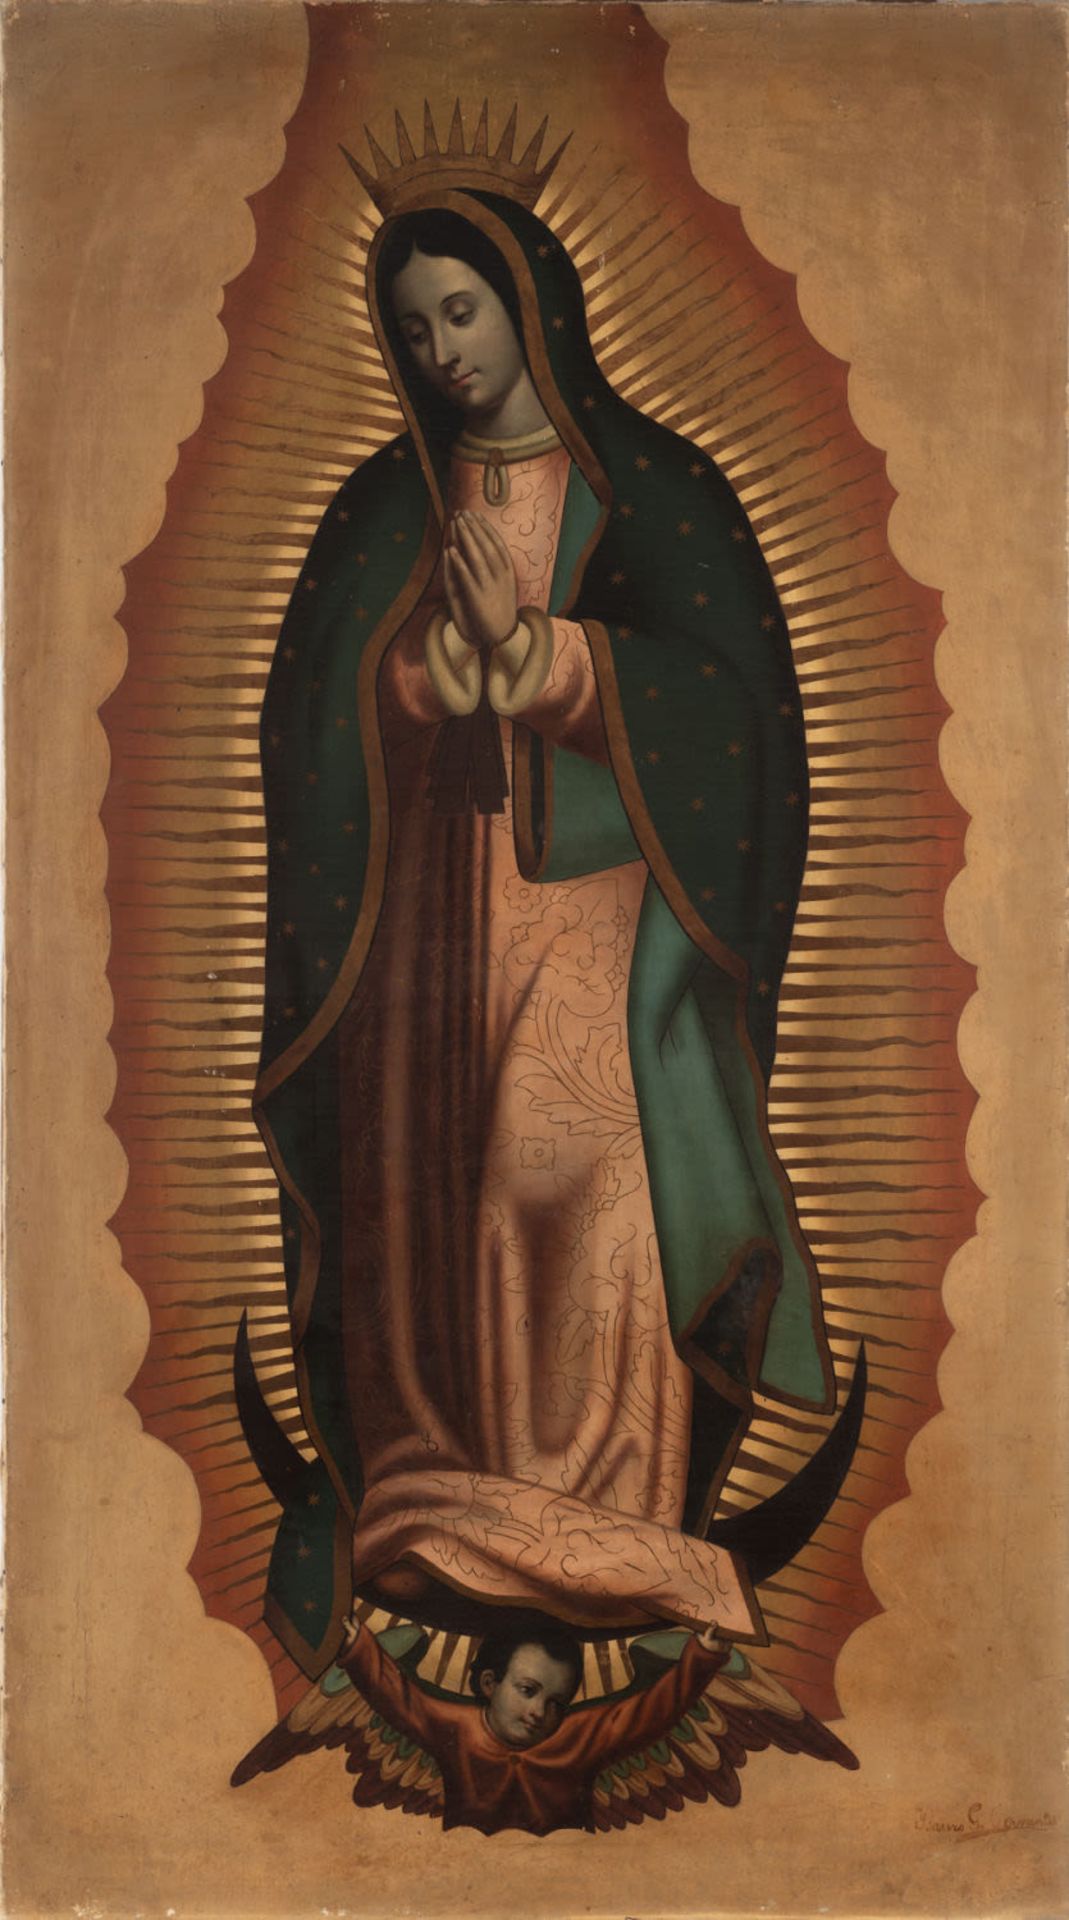 Colonial school, Mexico, 19th century. Guadalupe's Virgin.